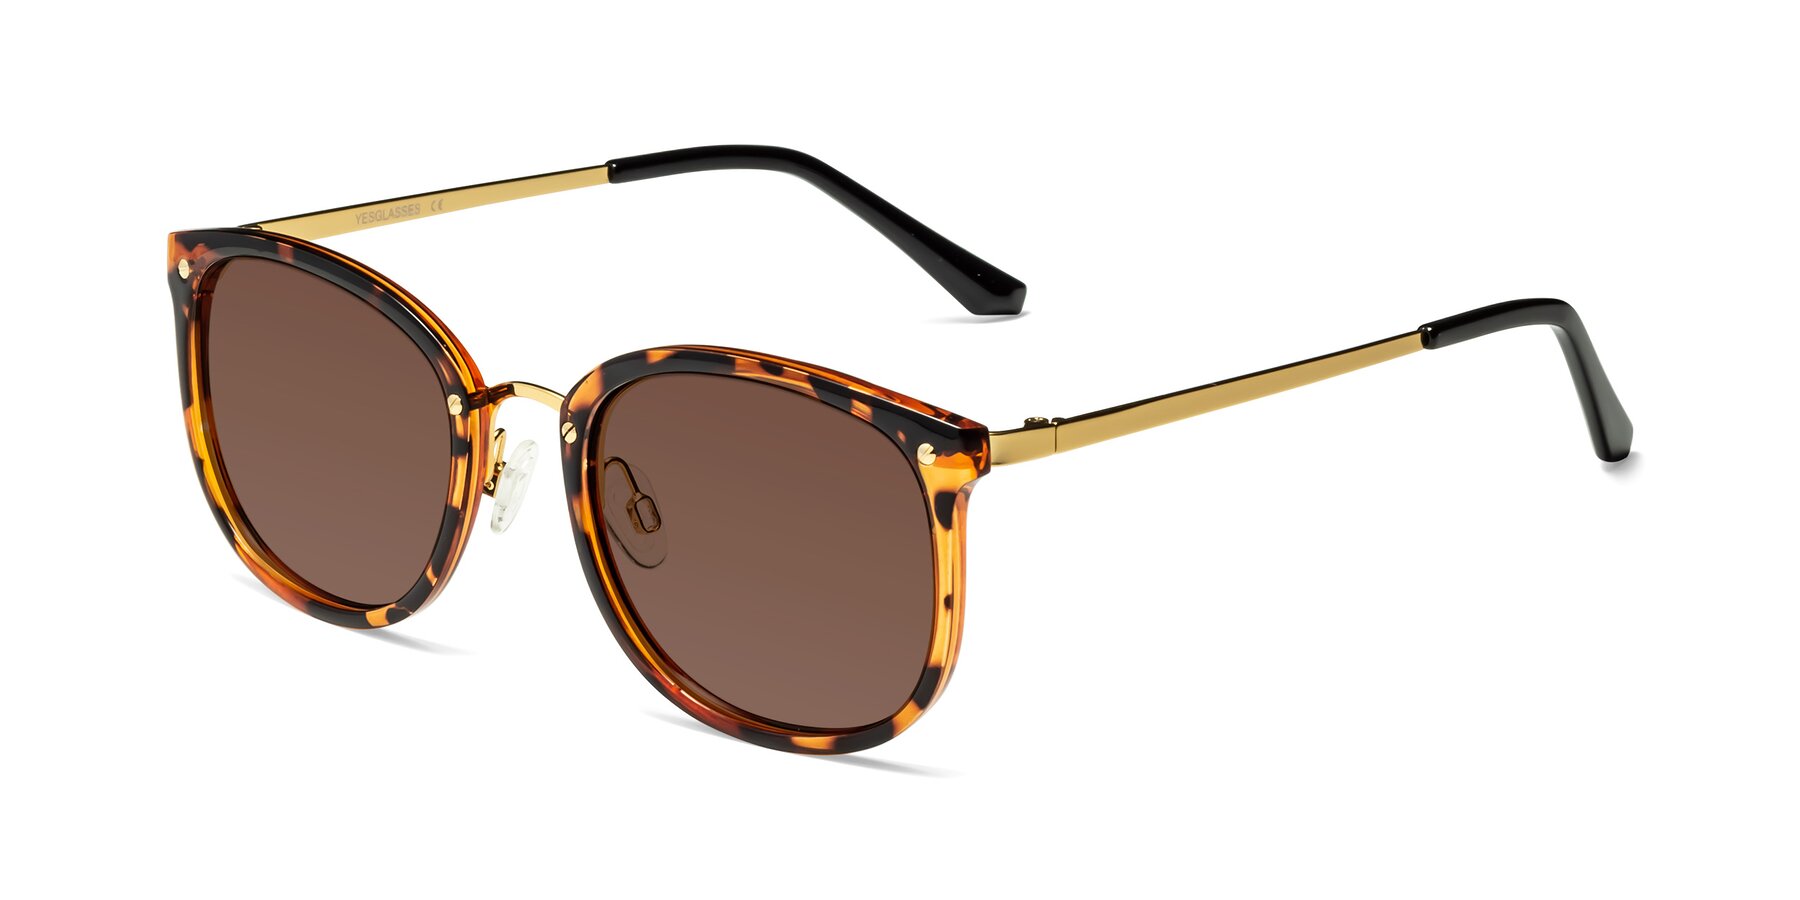 Angle of Timeless in Tortoise-Golden with Brown Tinted Lenses